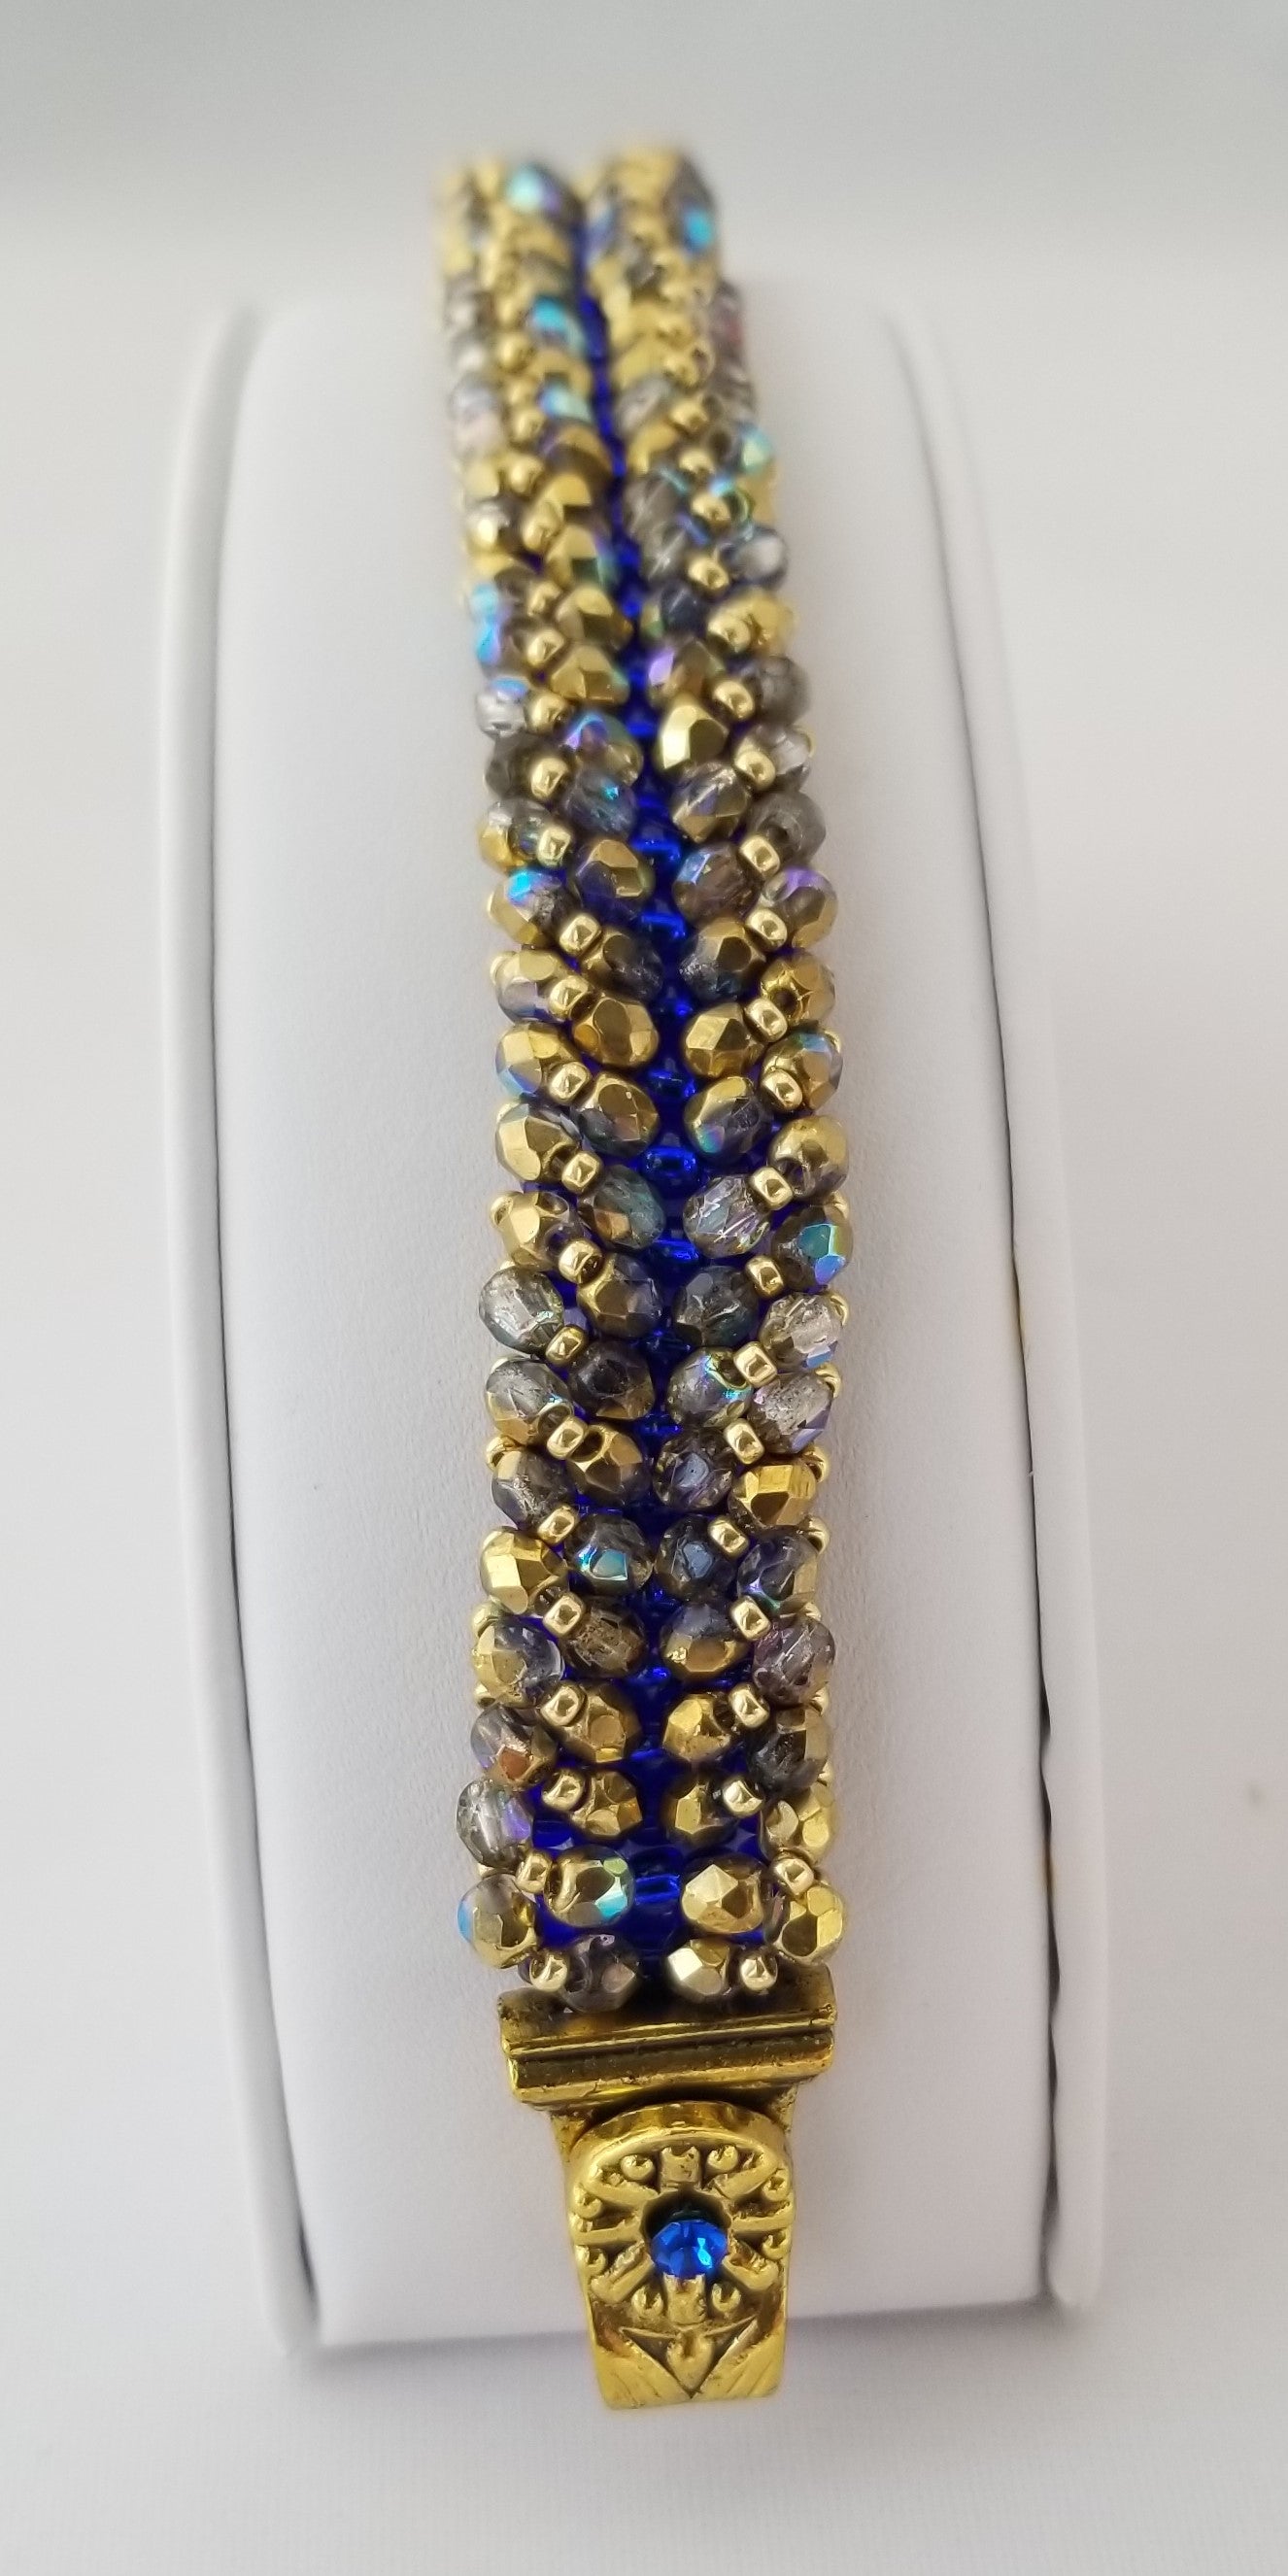 a gold and blue beaded bracelet on a white surface